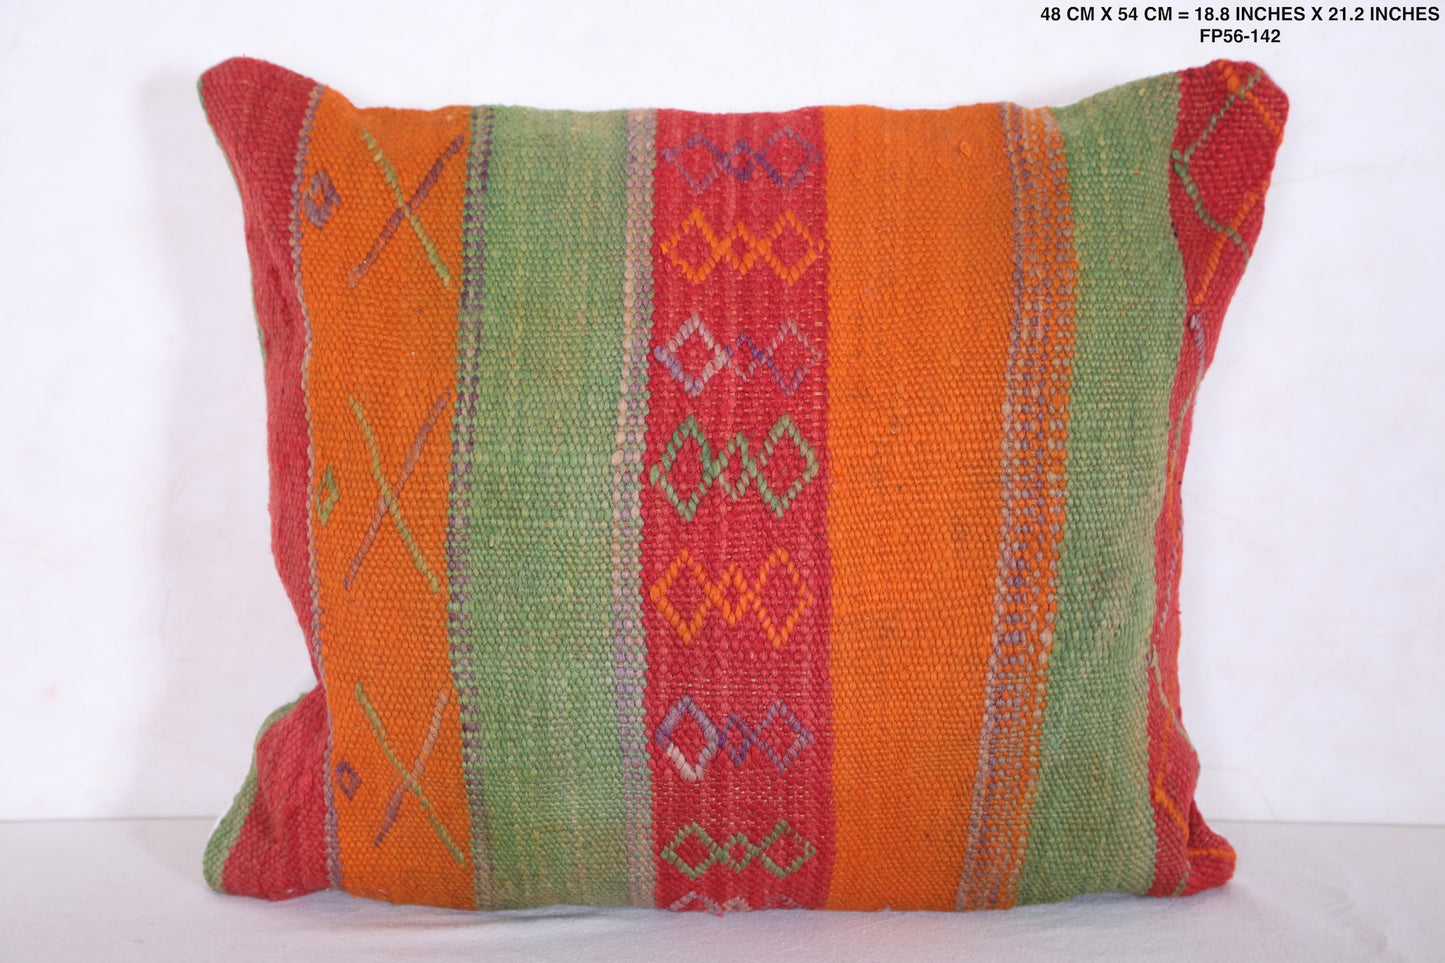 Moroccan handmade kilim pillow 18.8 INCHES X 21.2 INCHES